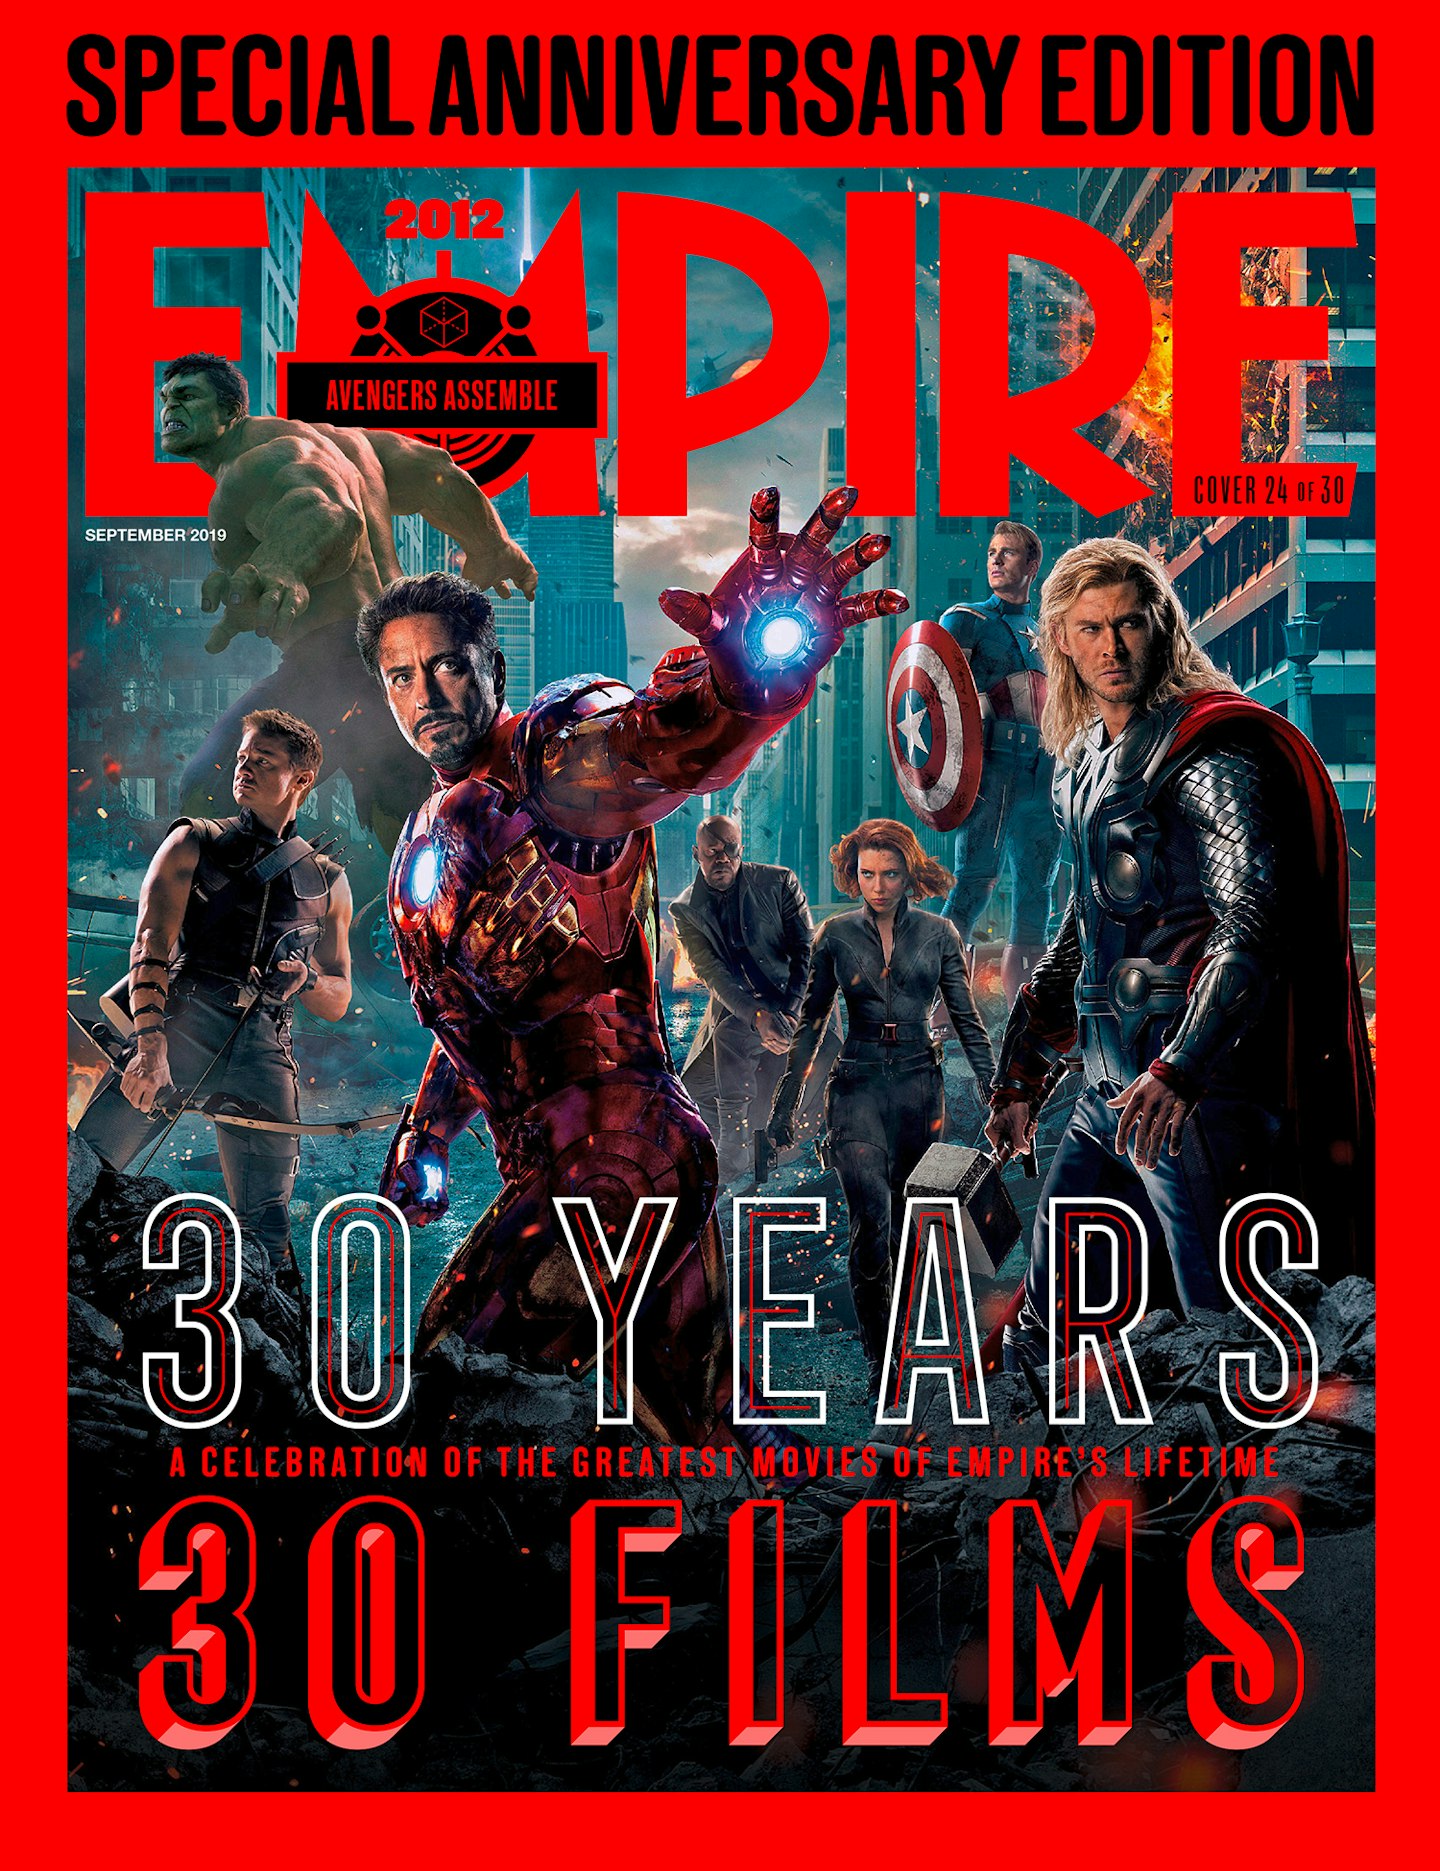 Empire's 30th Anniversary Edition Covers – Avengers Assemble